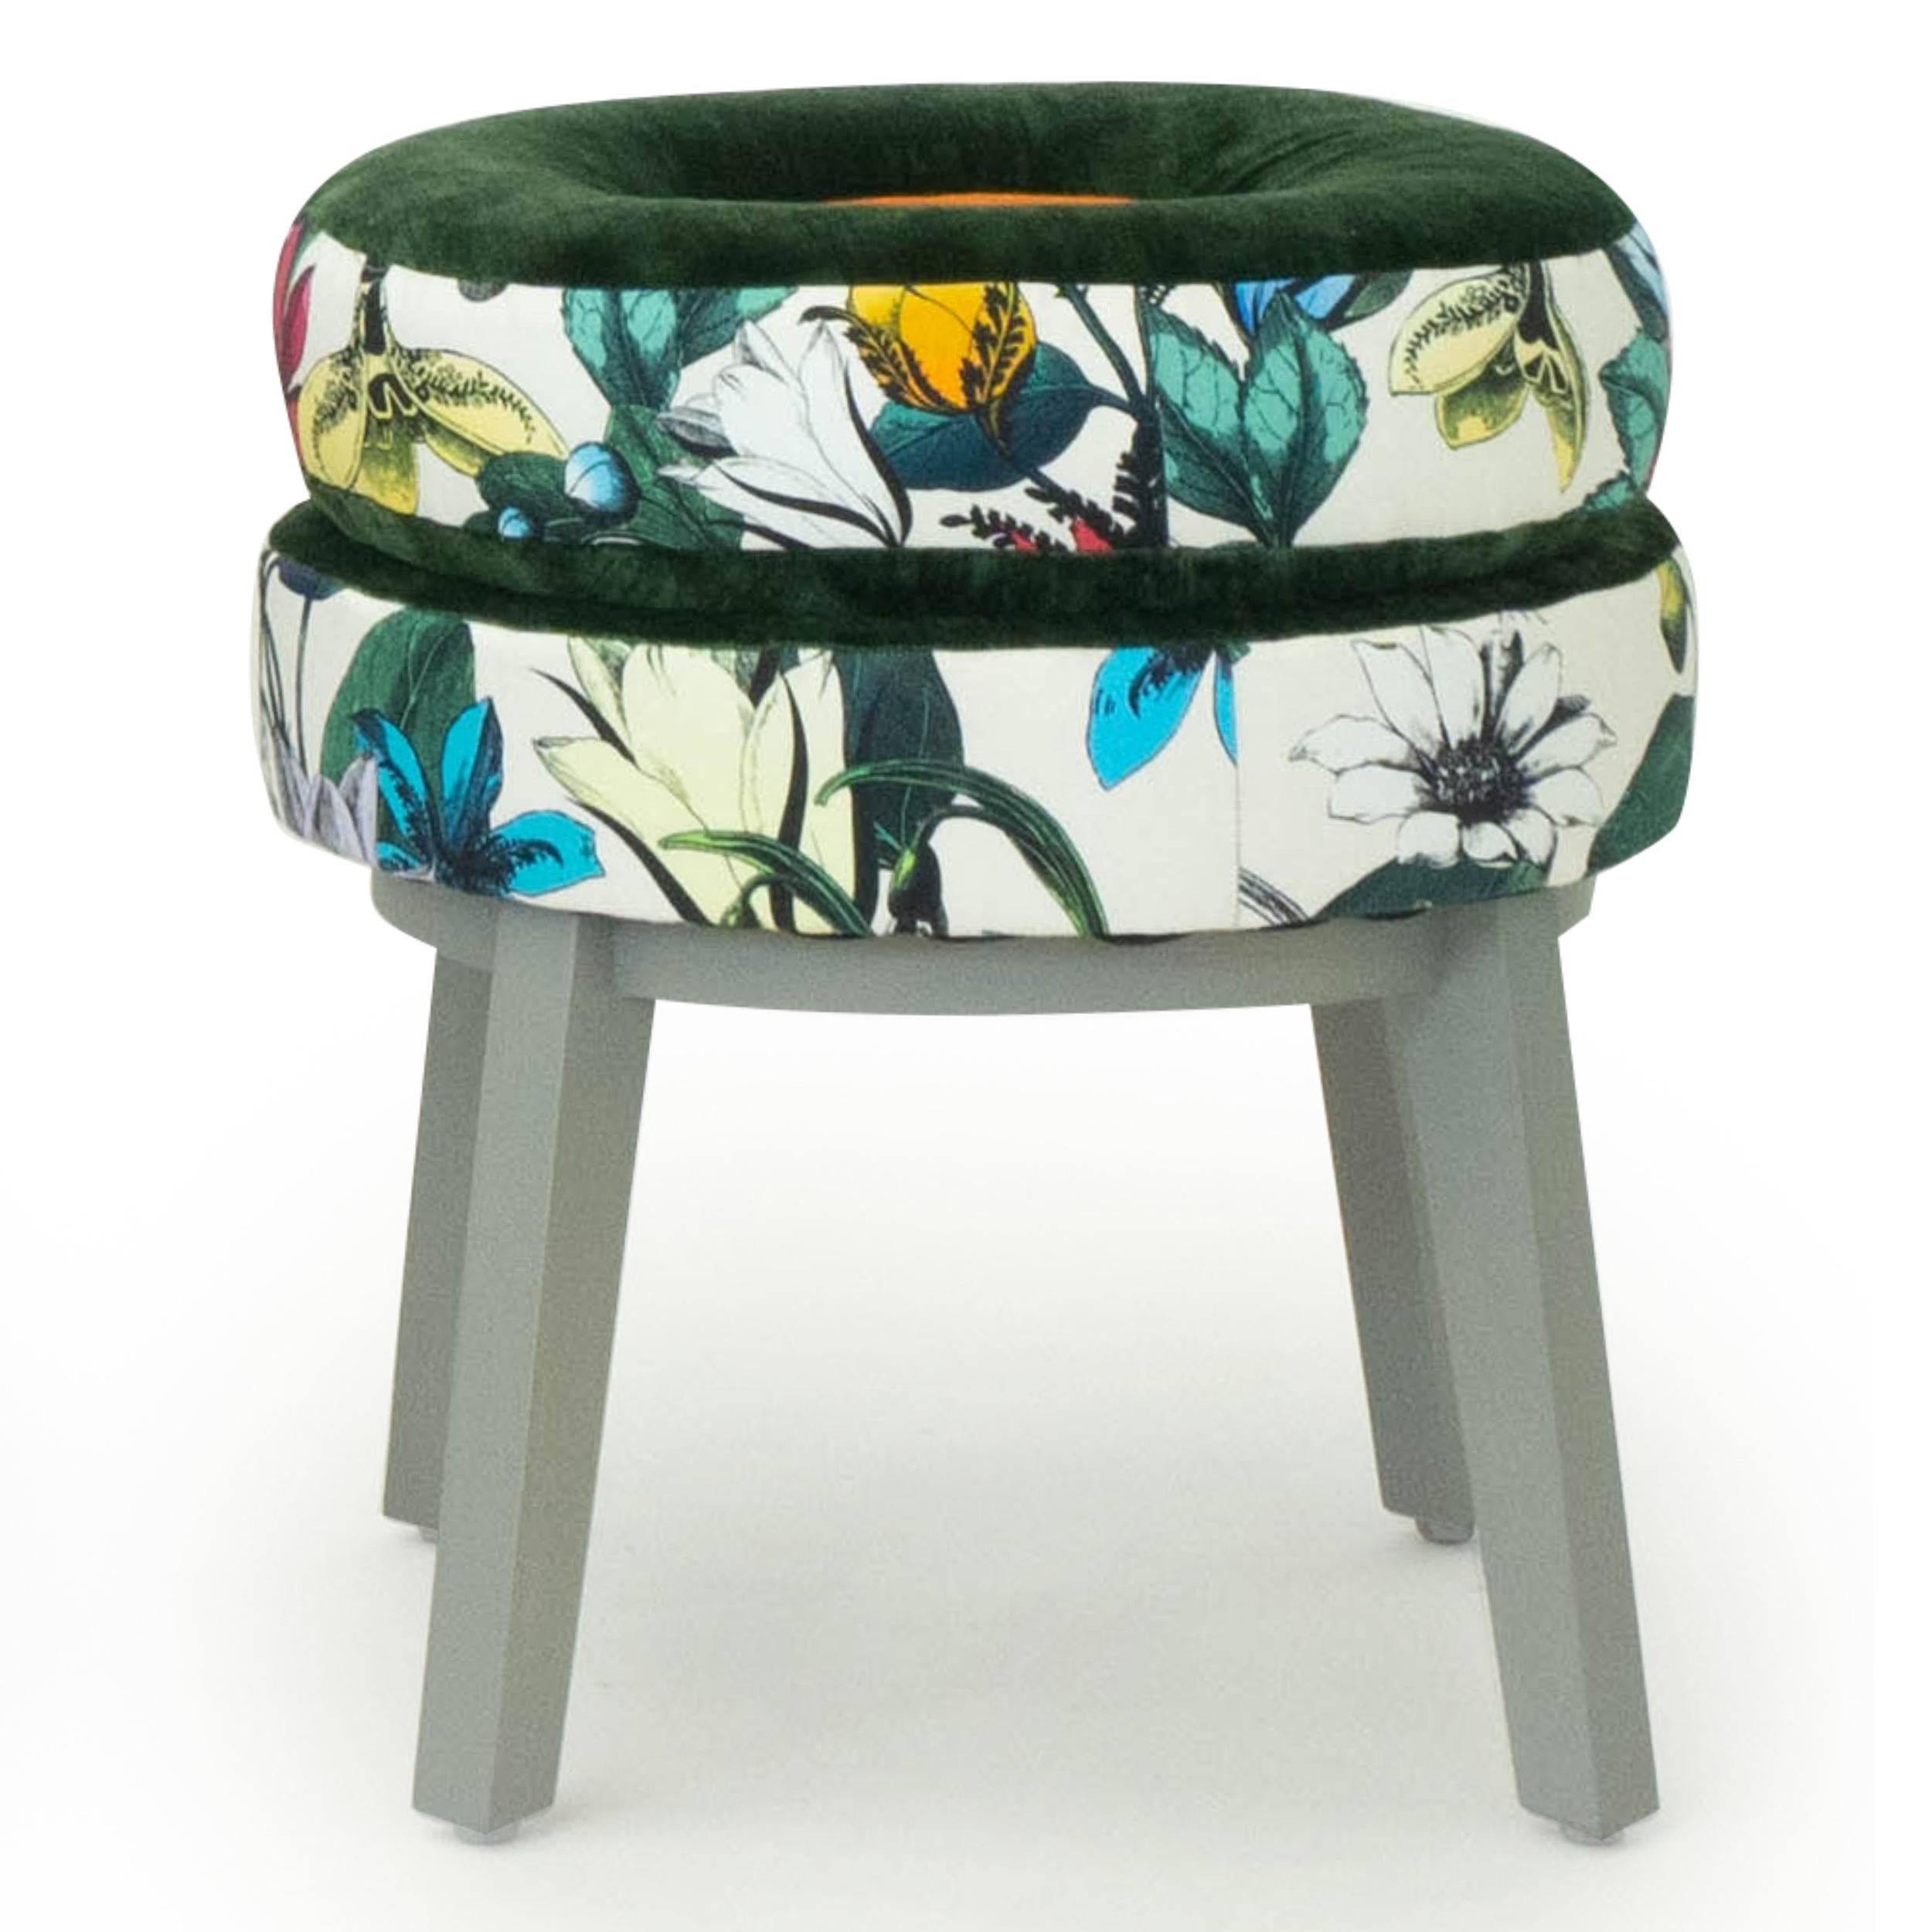 These small round stools are upholstered in a dark green velvet atop a butterfly printed fabric. Made with poplar wood painted with a gray Swedish finish. Sturdy base with a comfortable foam cushion seat, they are great for all ages. Check for